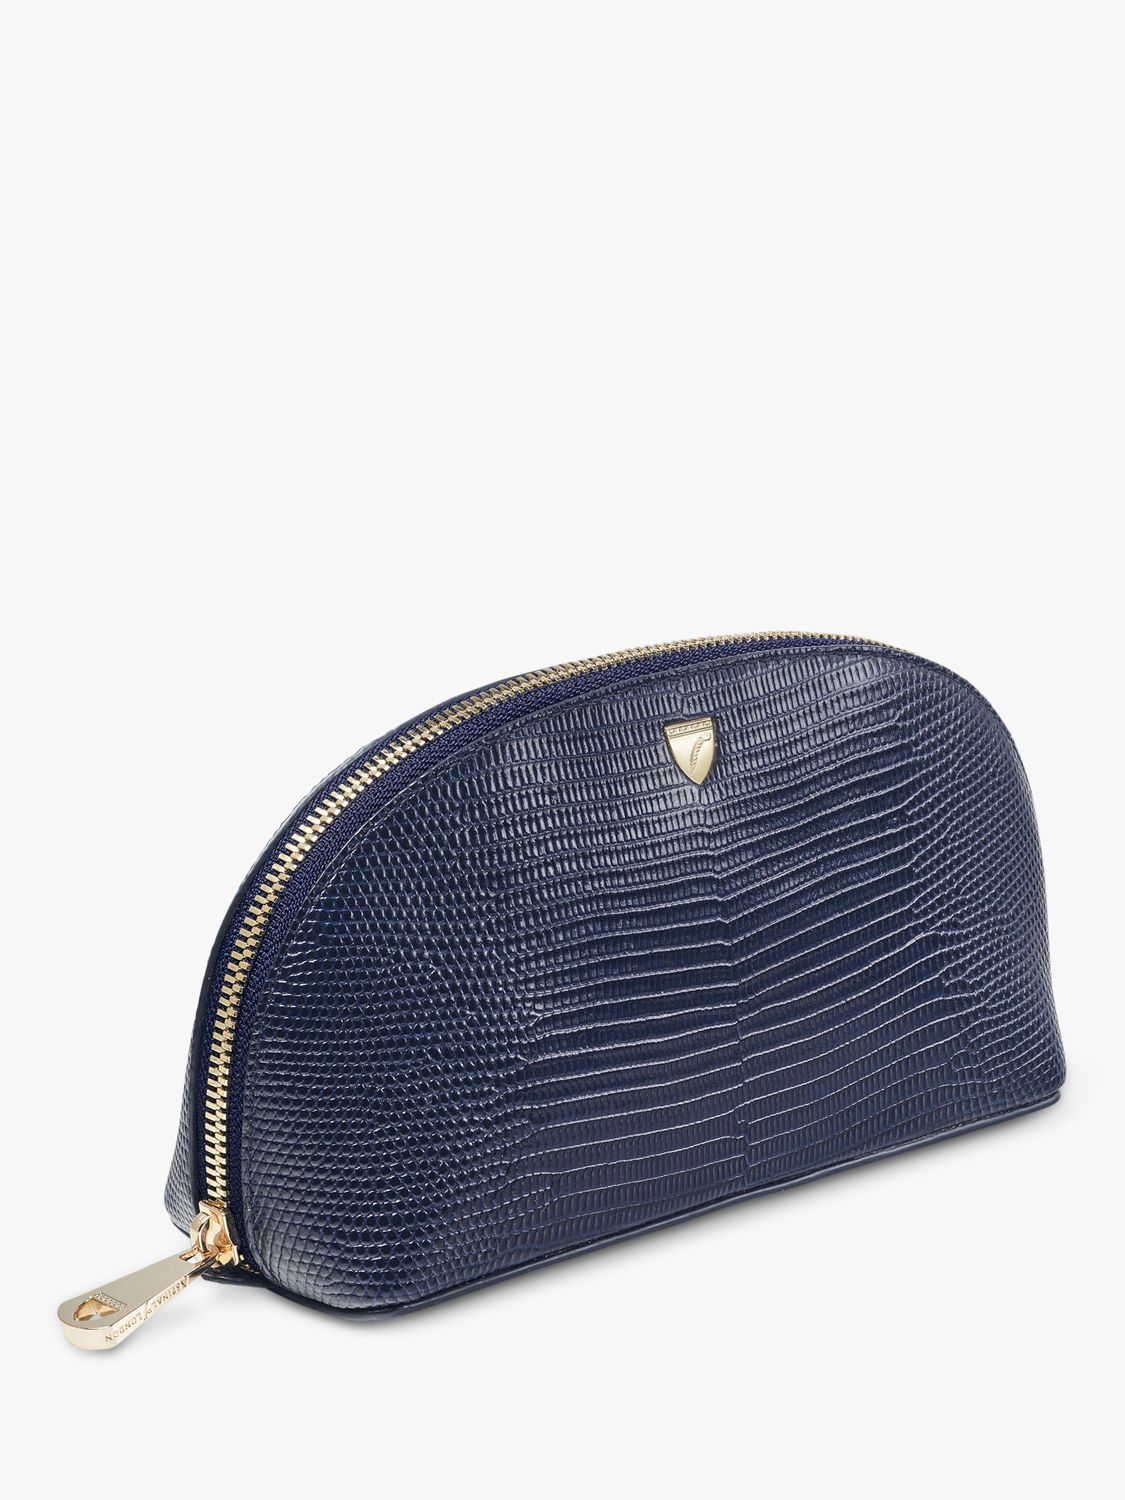 Aspinal of London Madsion Small Leather Cosmetic Case, Midnight Lizard 4